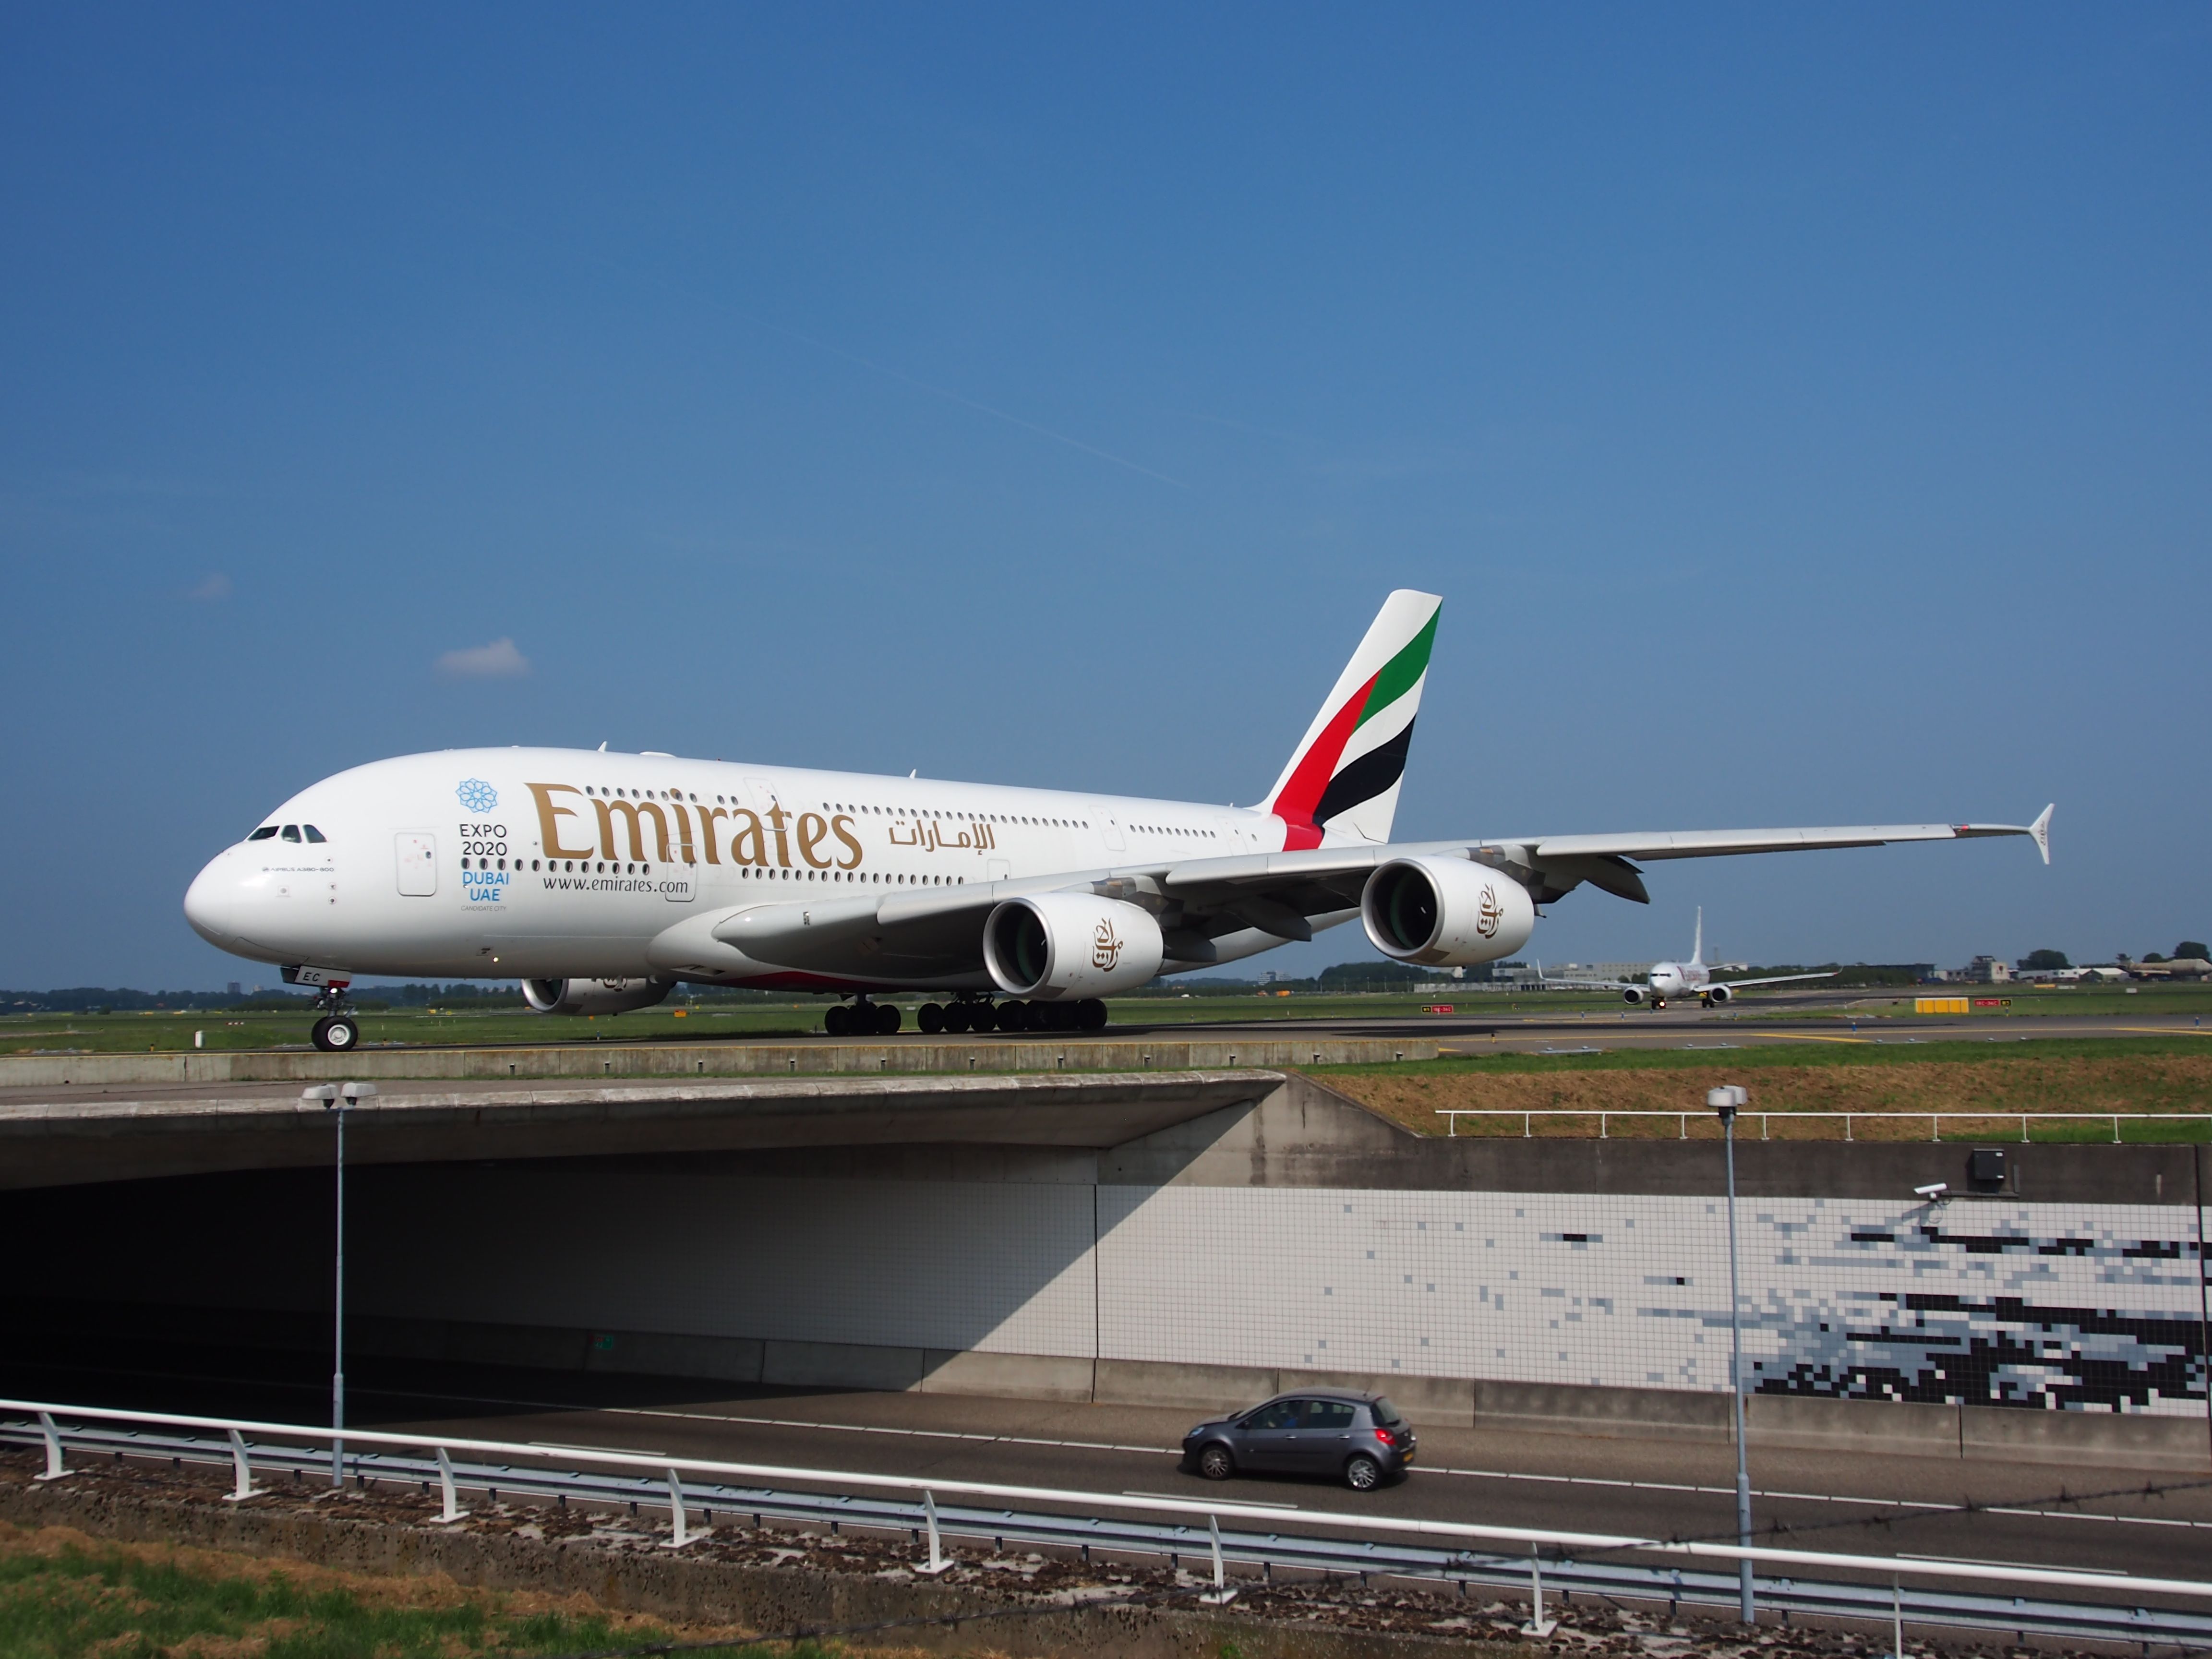 Emirates Airbus A380 at Amsterdam Schiphol Airport